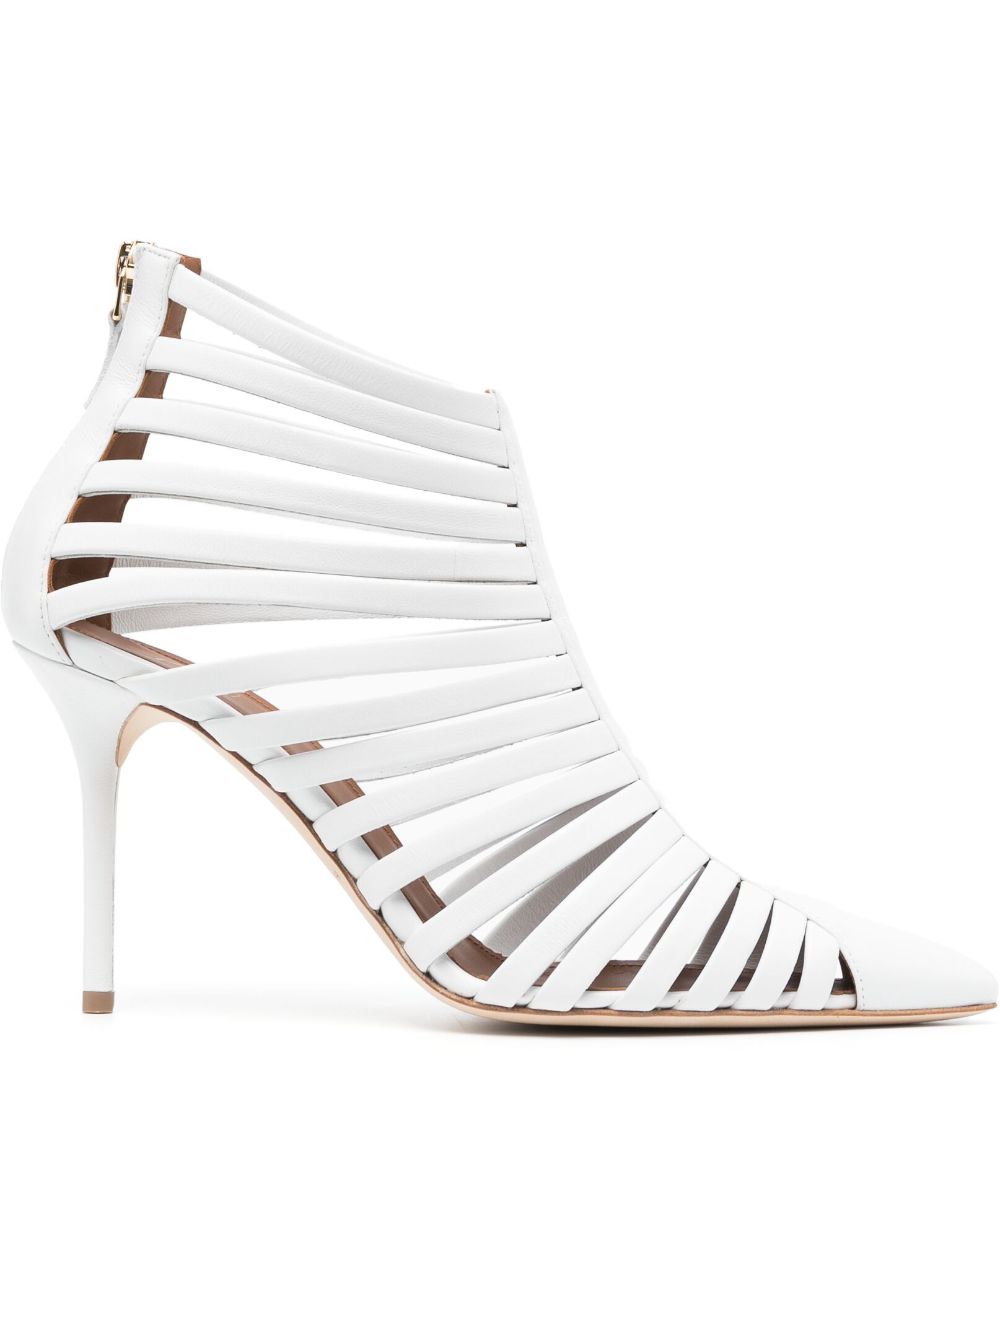 Malone Souliers caged pointed-toe 100mm leather pumps - White von Malone Souliers